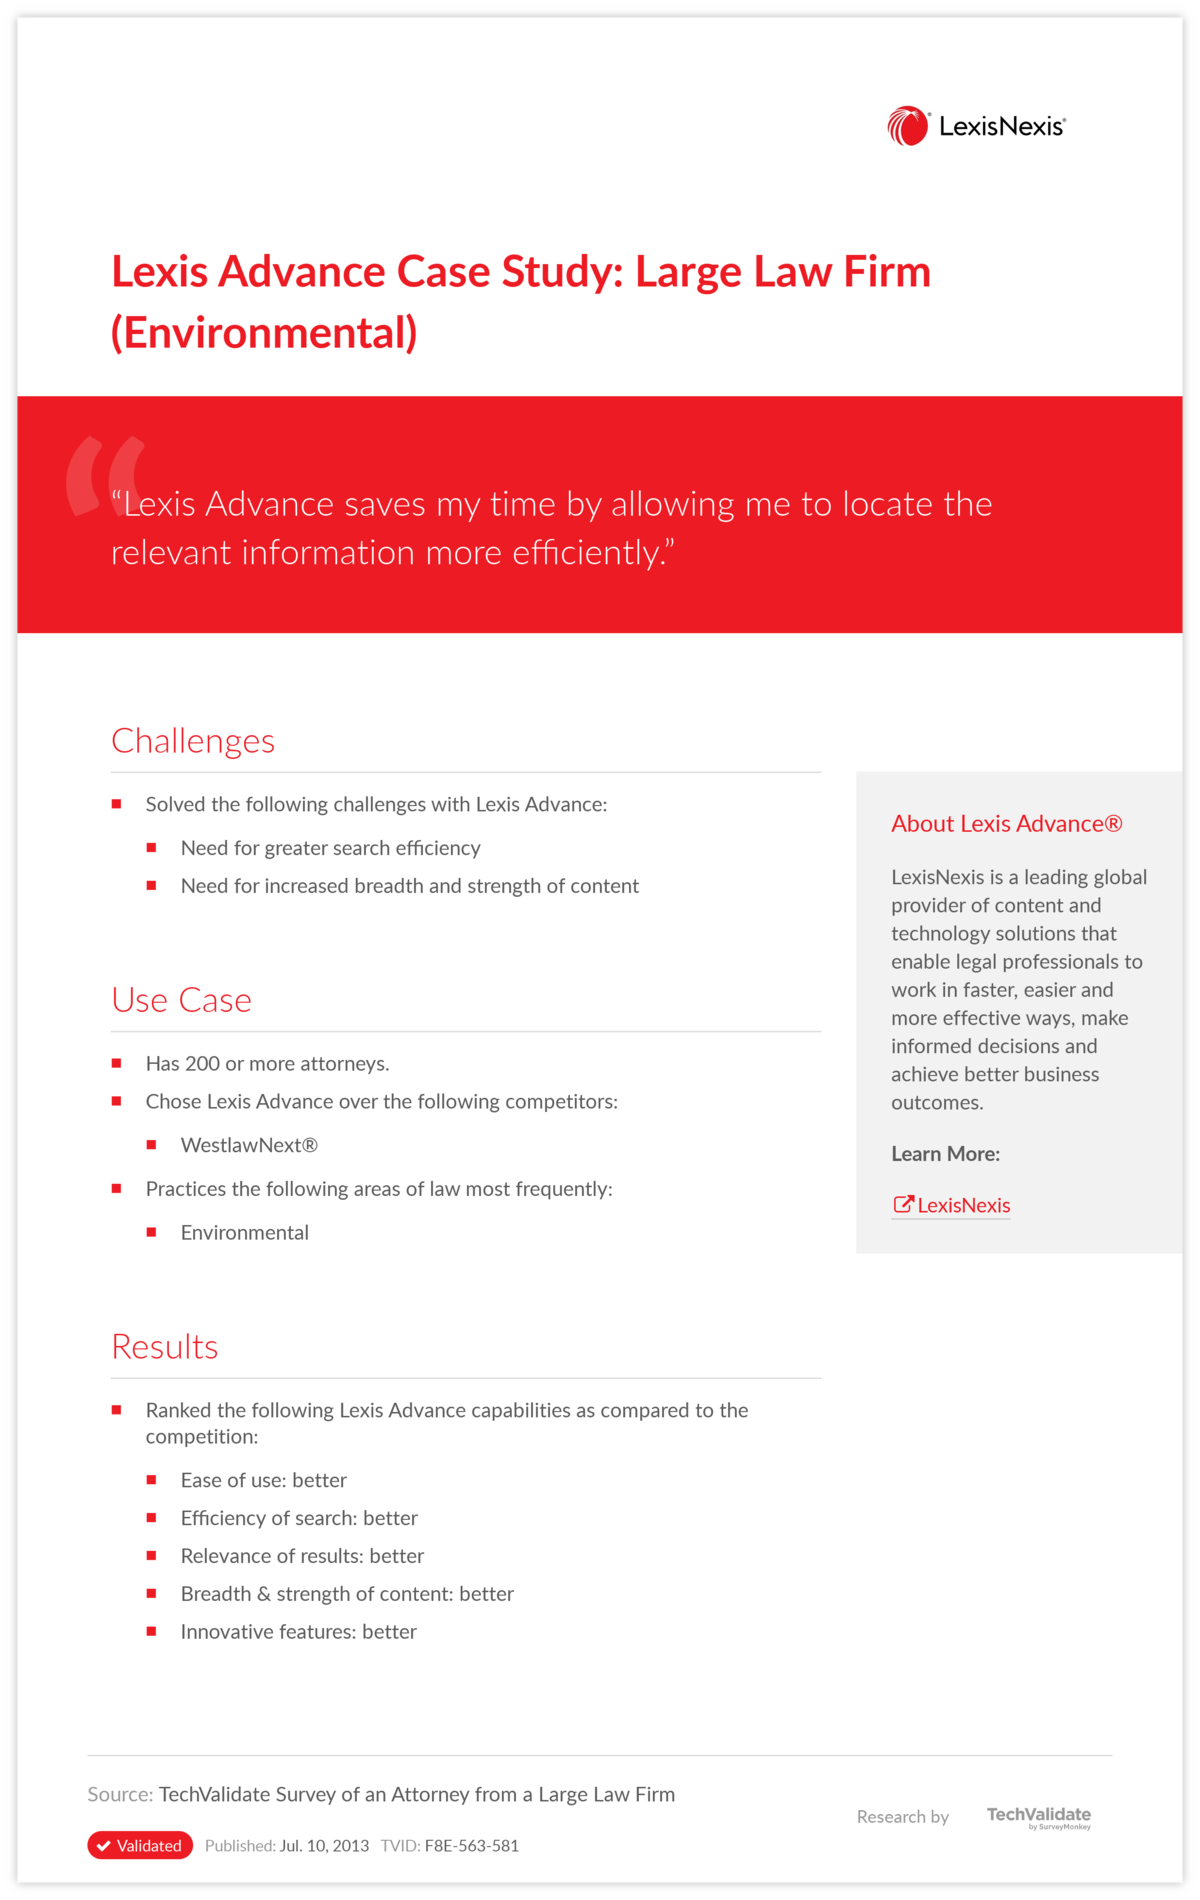 Lexis Advance Case Study: Large Law Firm (Environmental)